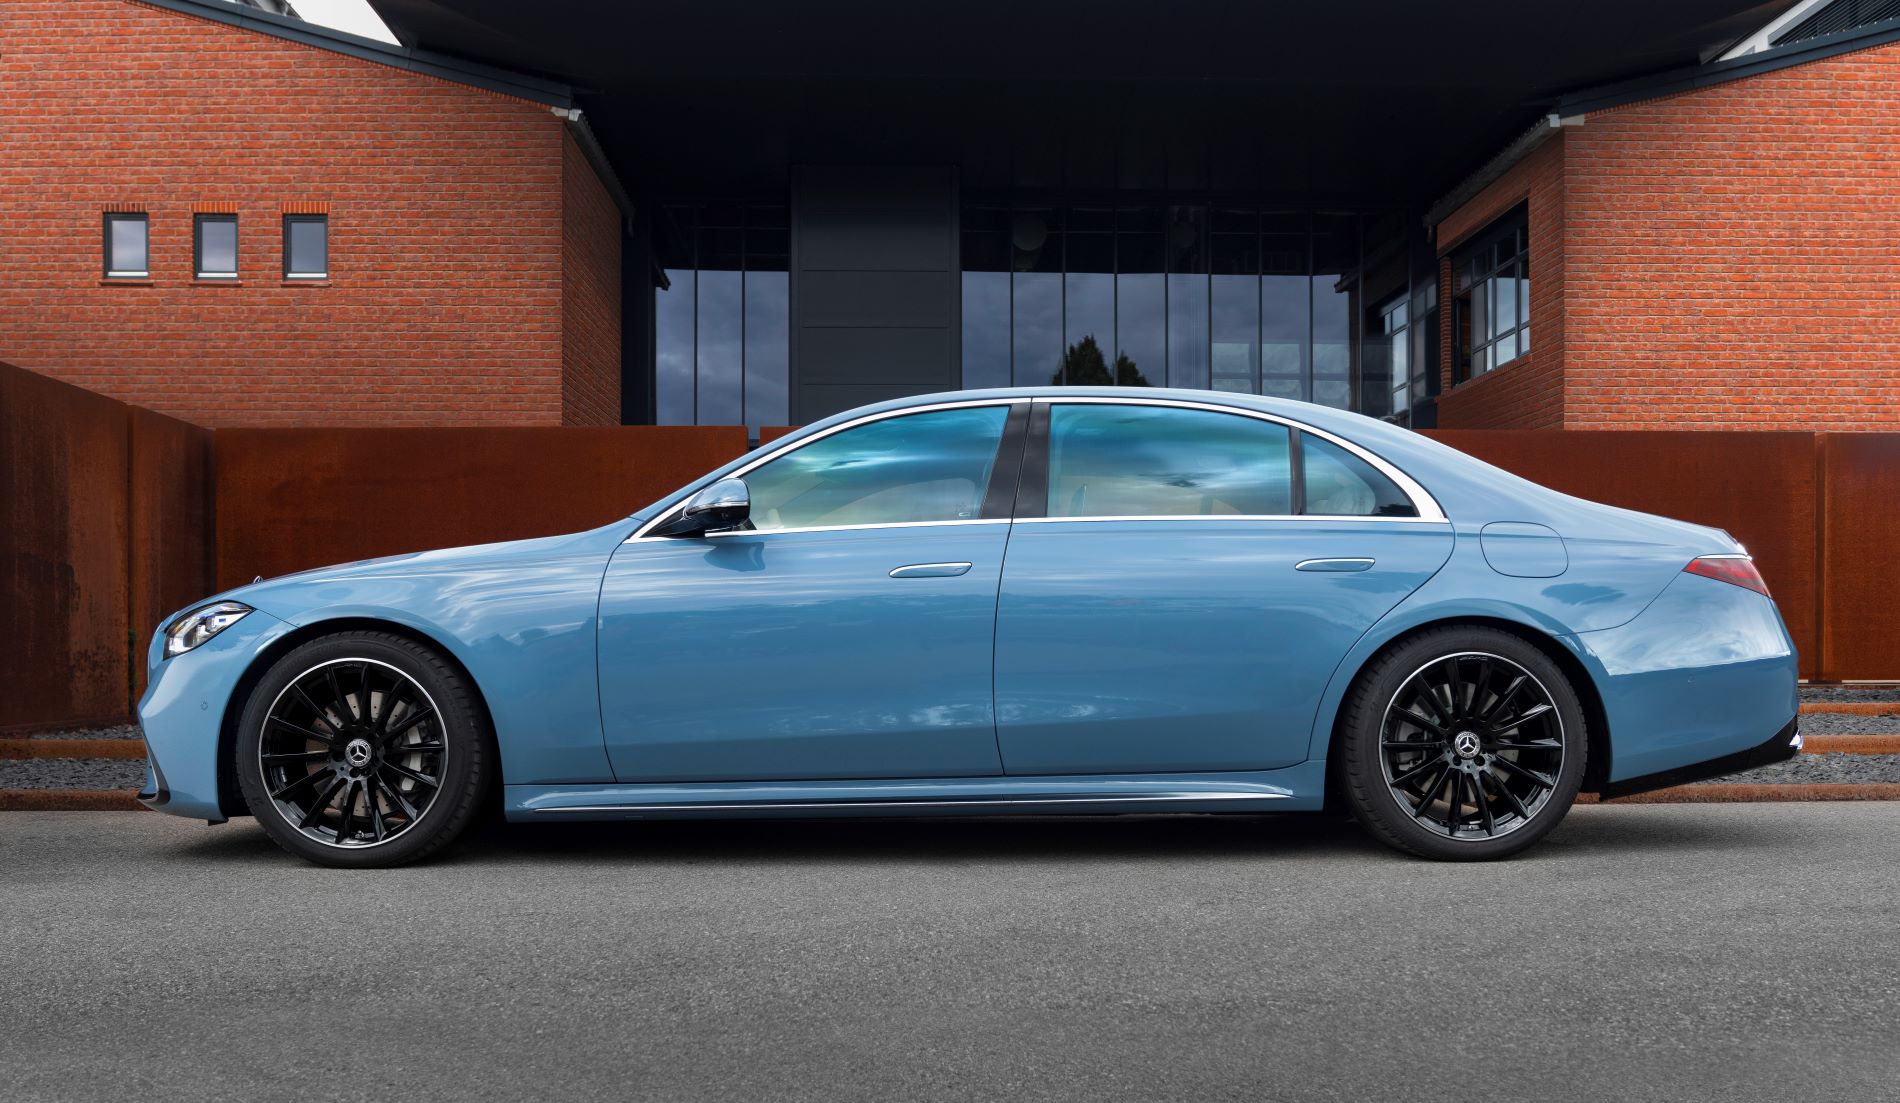 Side view of the Mercedes-Benz S-Class in blue